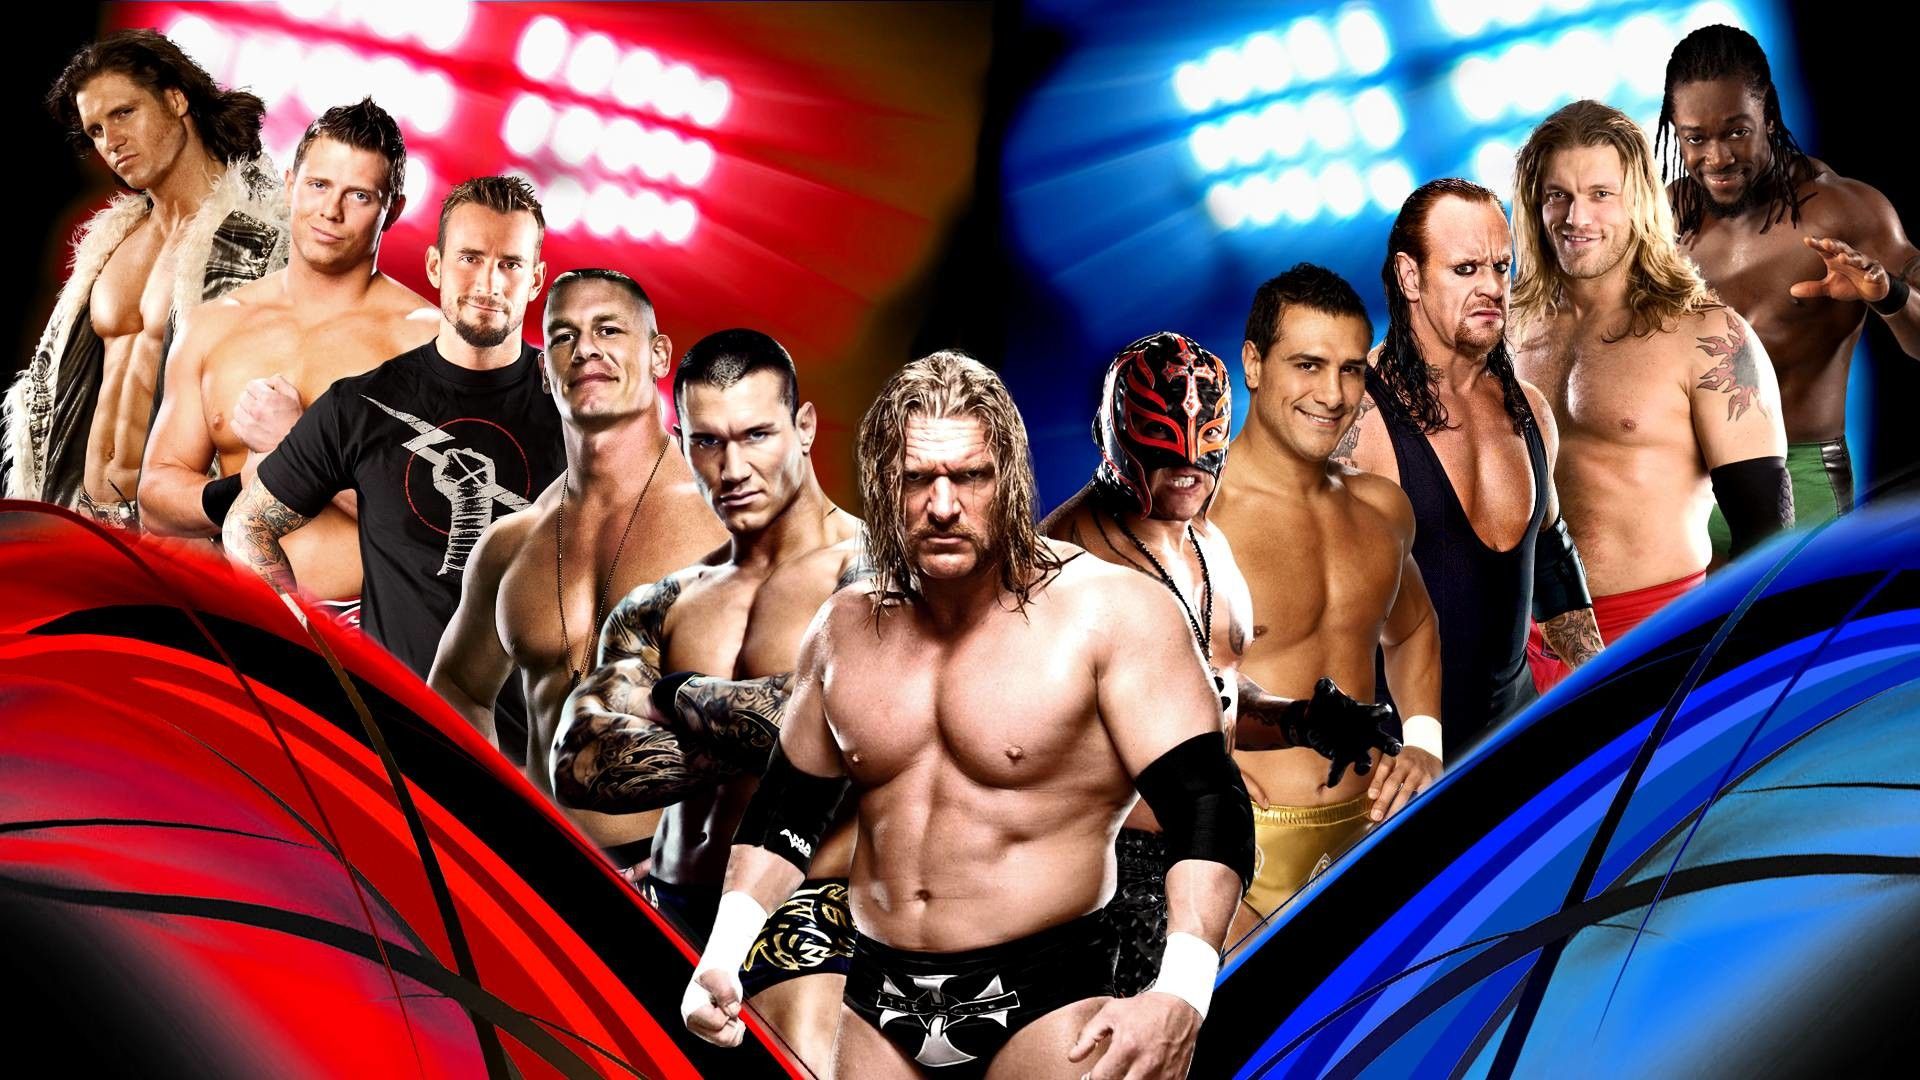 1920x1080 New Cover And Wallpaper I Made Smackdown Vs Raw Hd Wallpaper Background Download